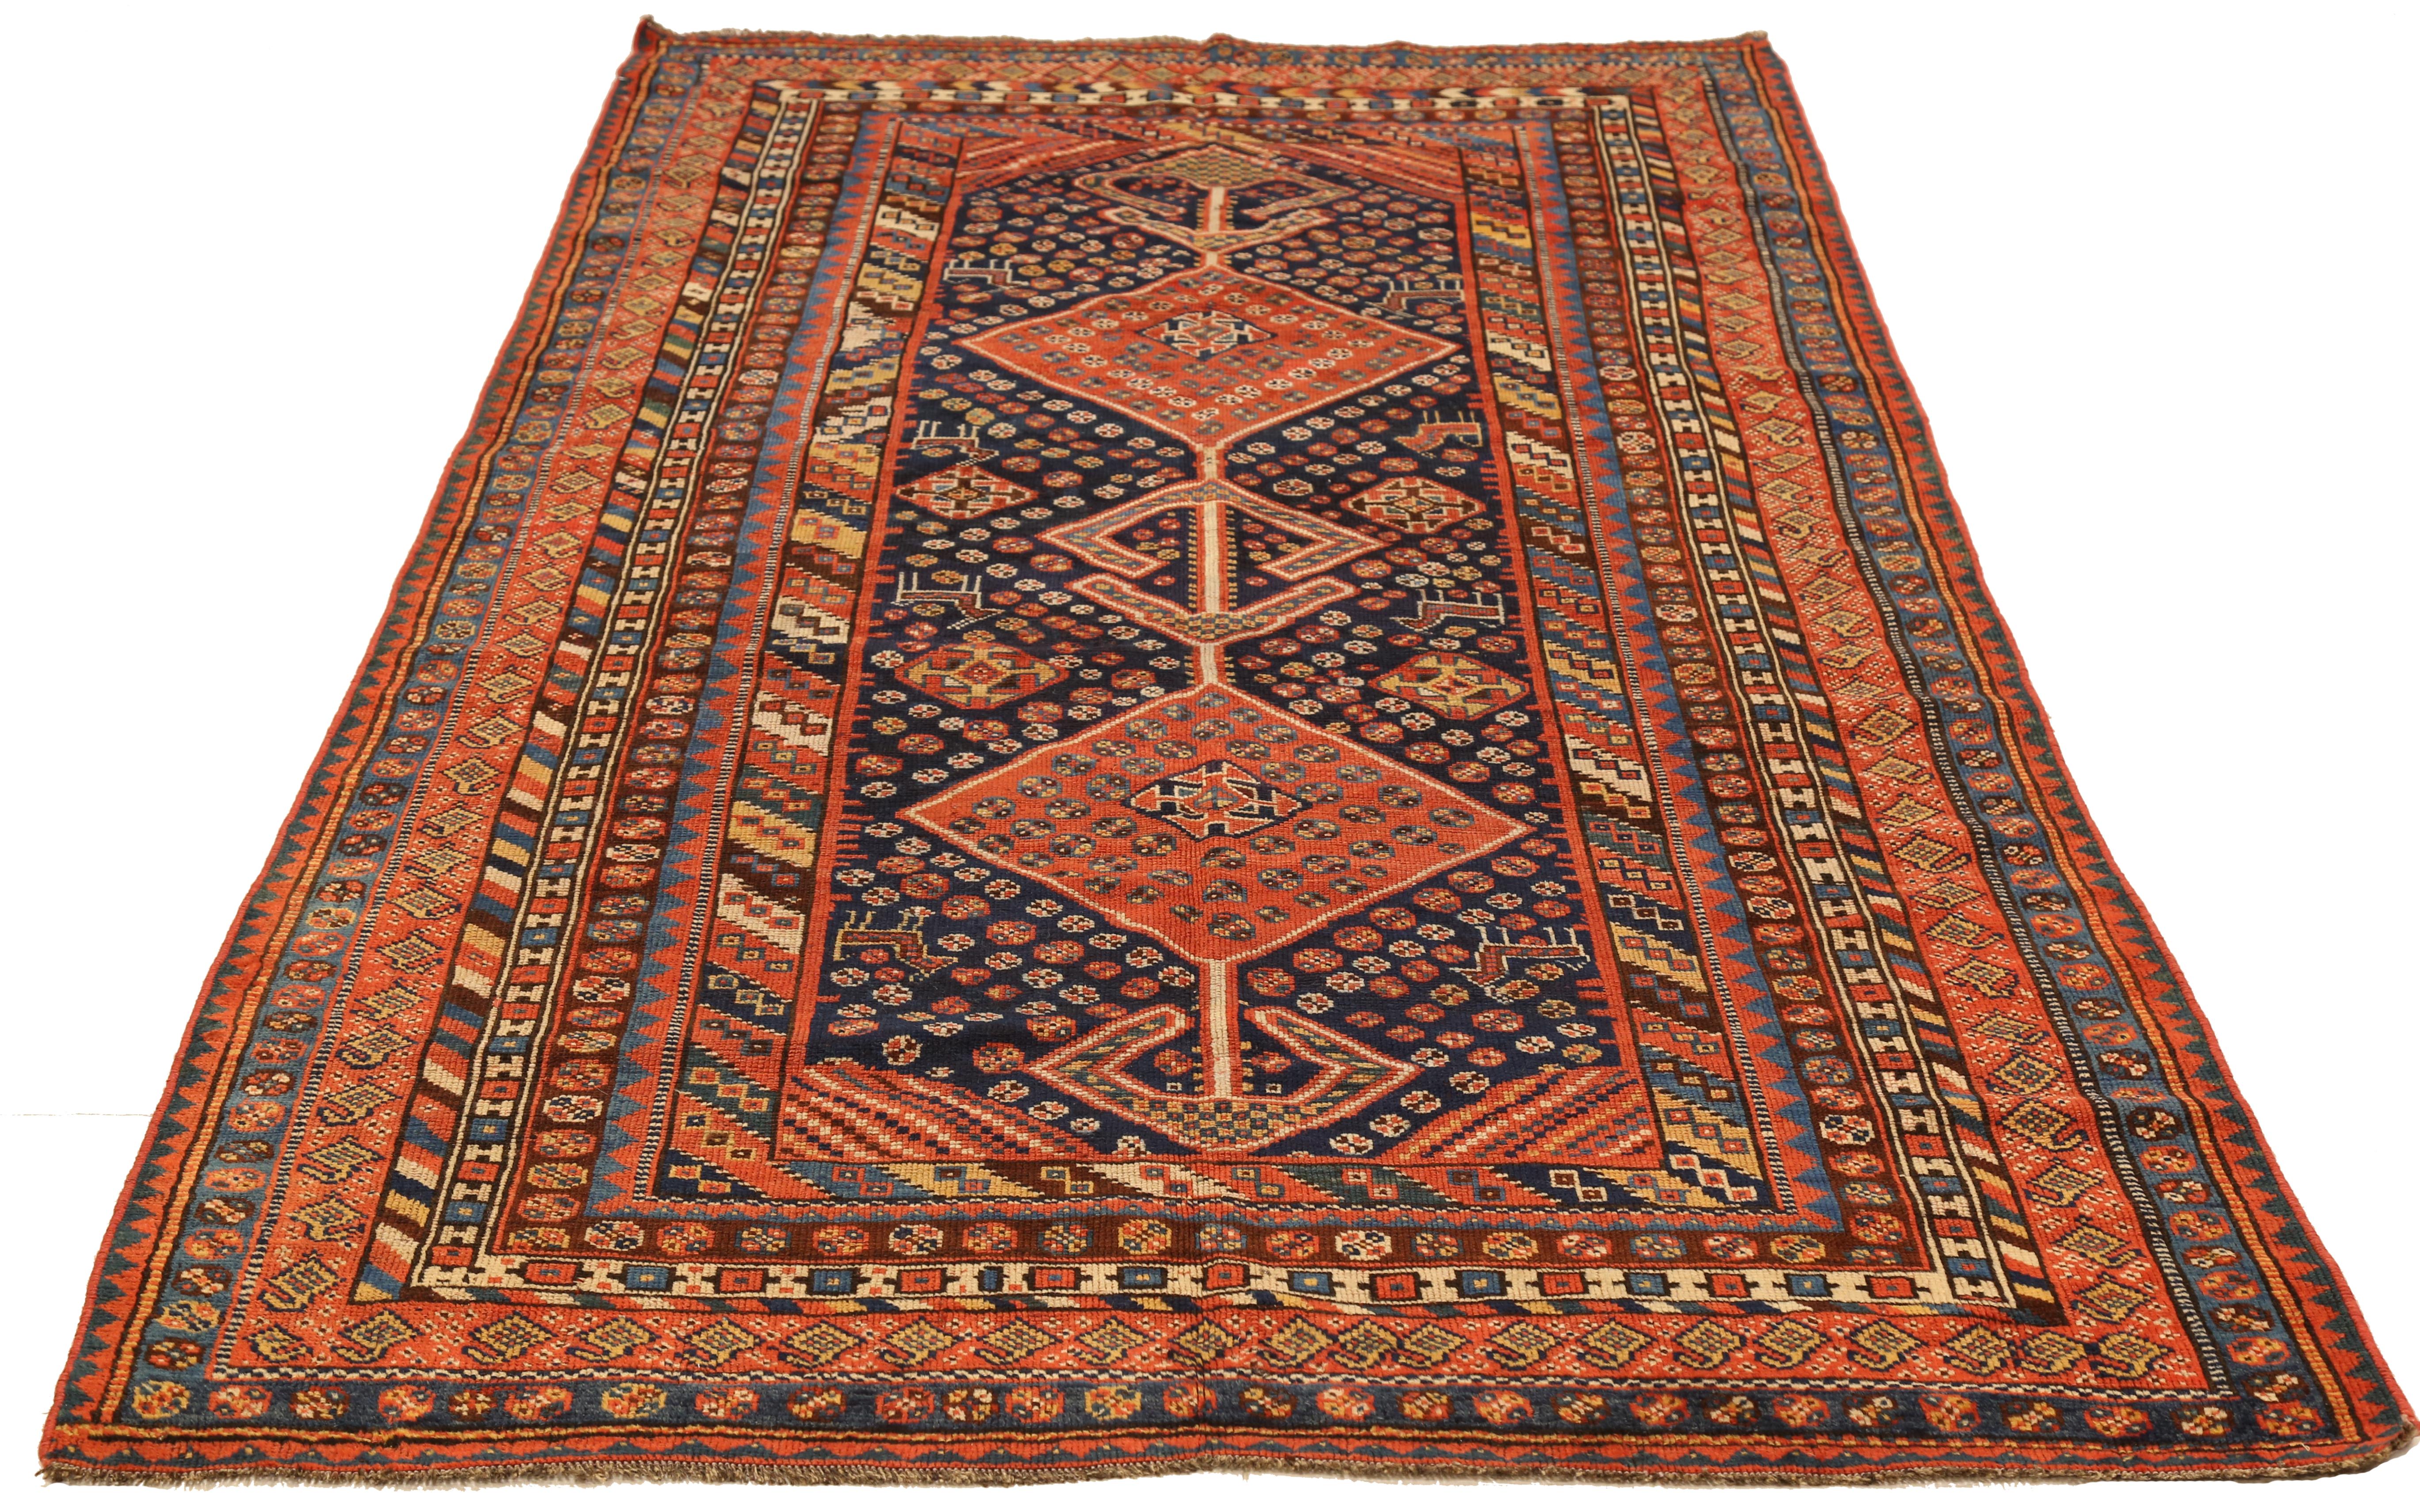 Mid-20th century hand knotted Persian area rug made from fine wool and all-natural vegetable dyes that are safe for people and pets. This beautiful piece features intricate tribal details in various colors which Shiraz rugs are known for. Persian